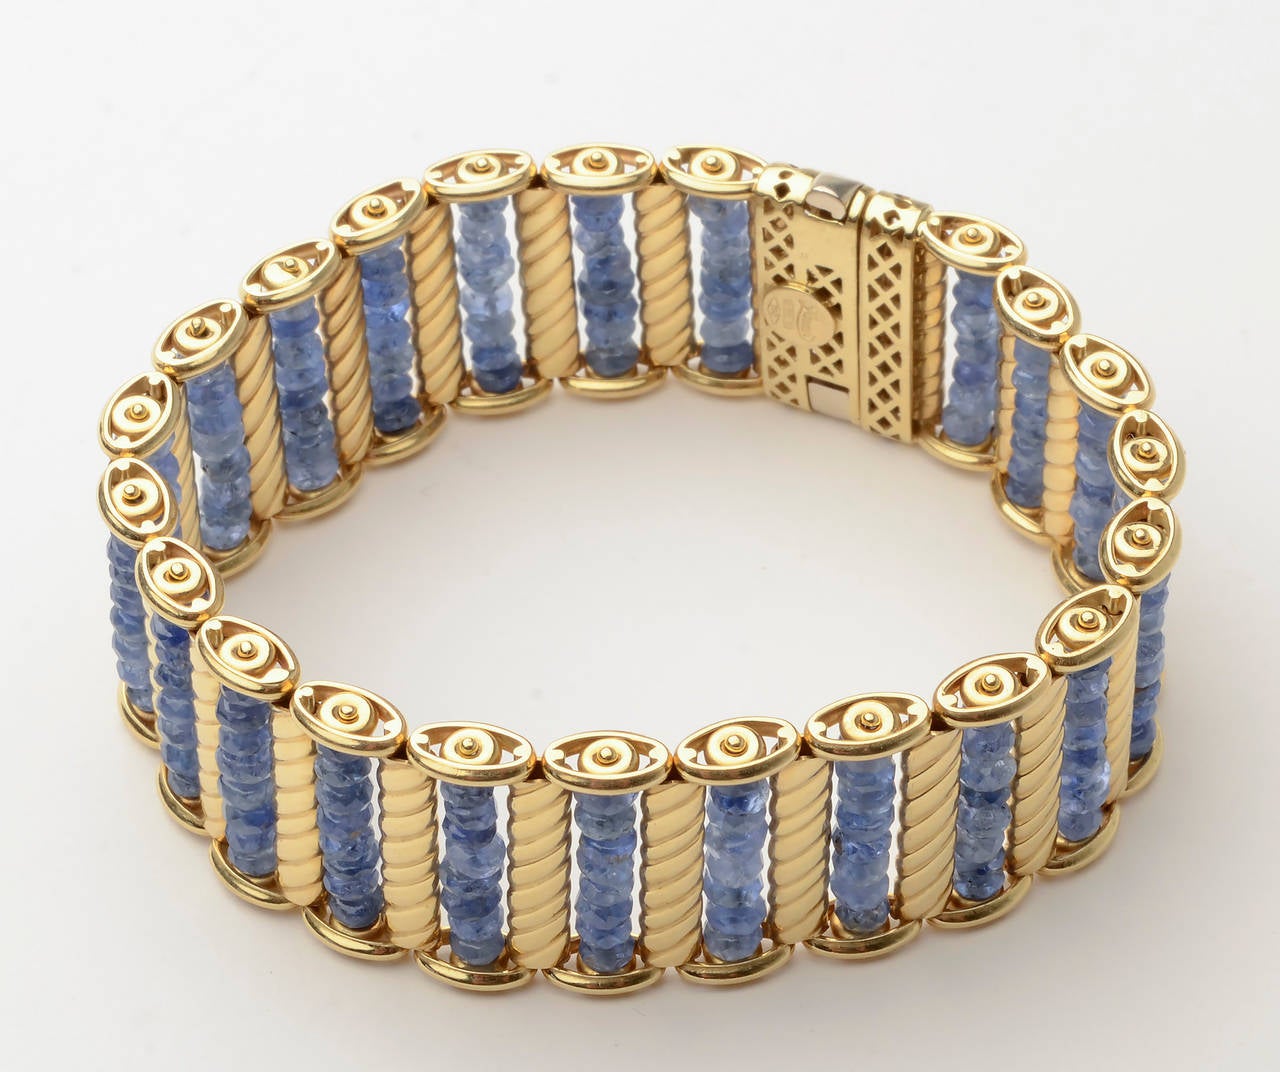 This unusual  bracelet by Zancan is made of oval sapphire beads surrounded by bars of gold with an incised diagonal design. It is beautifully constructed with nicely ornamented links on top and bottom. The bracelet is 18 karat gold. It measures 7